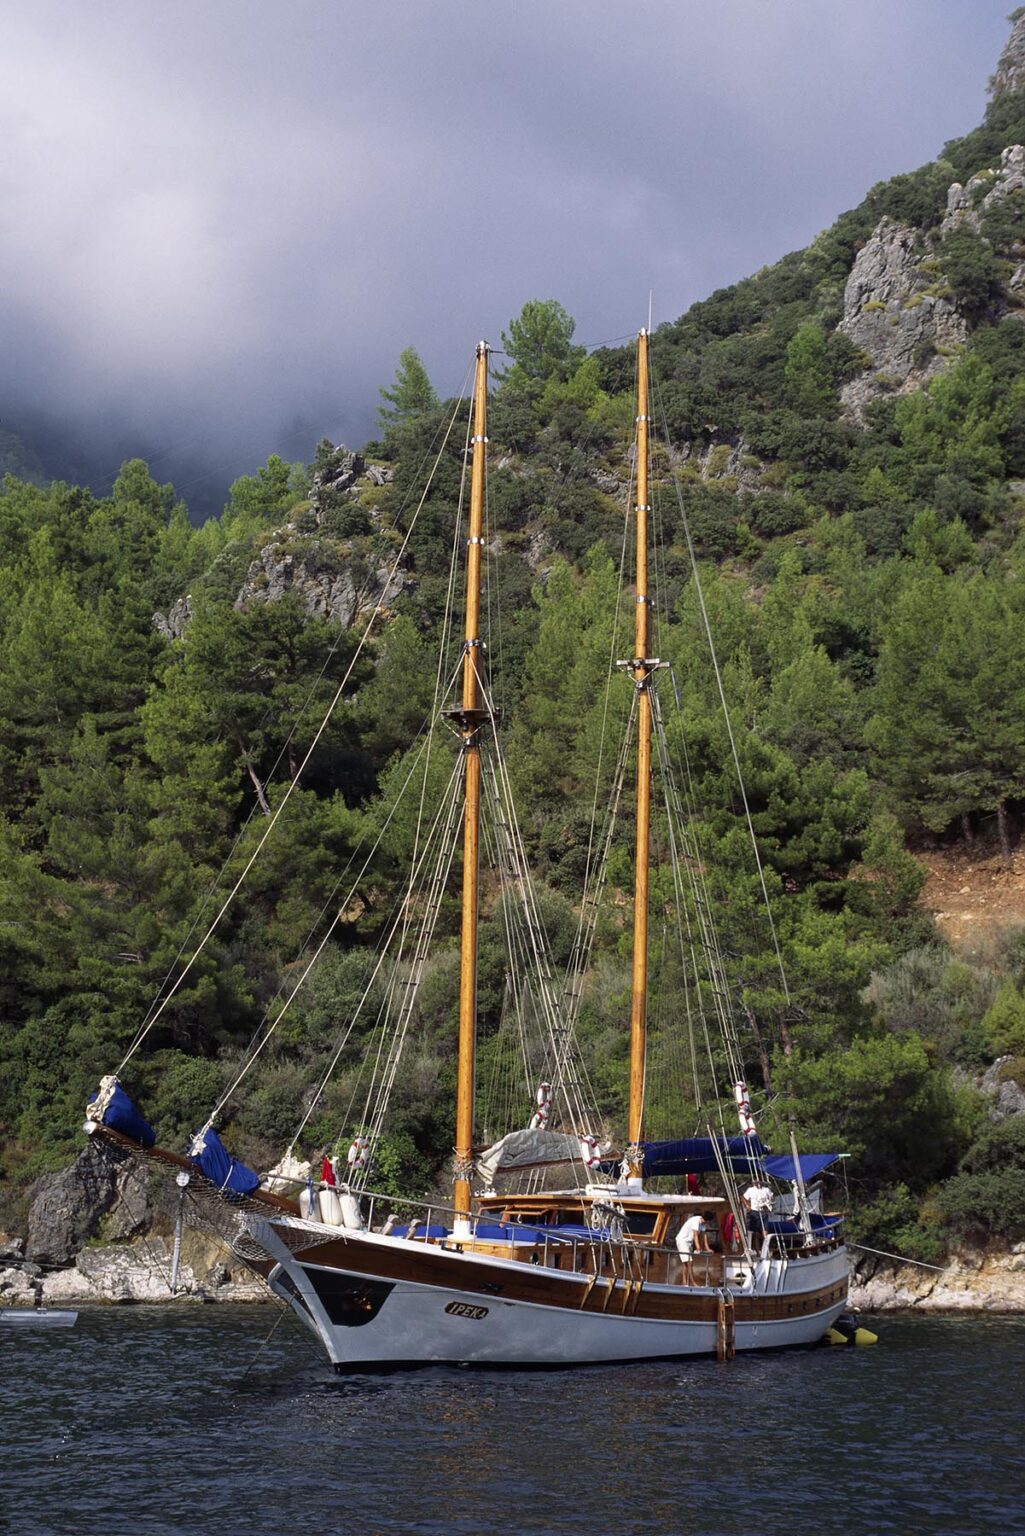 Our GULET the Ipek A at anchor - TURQUOISE COAST, TURKEY